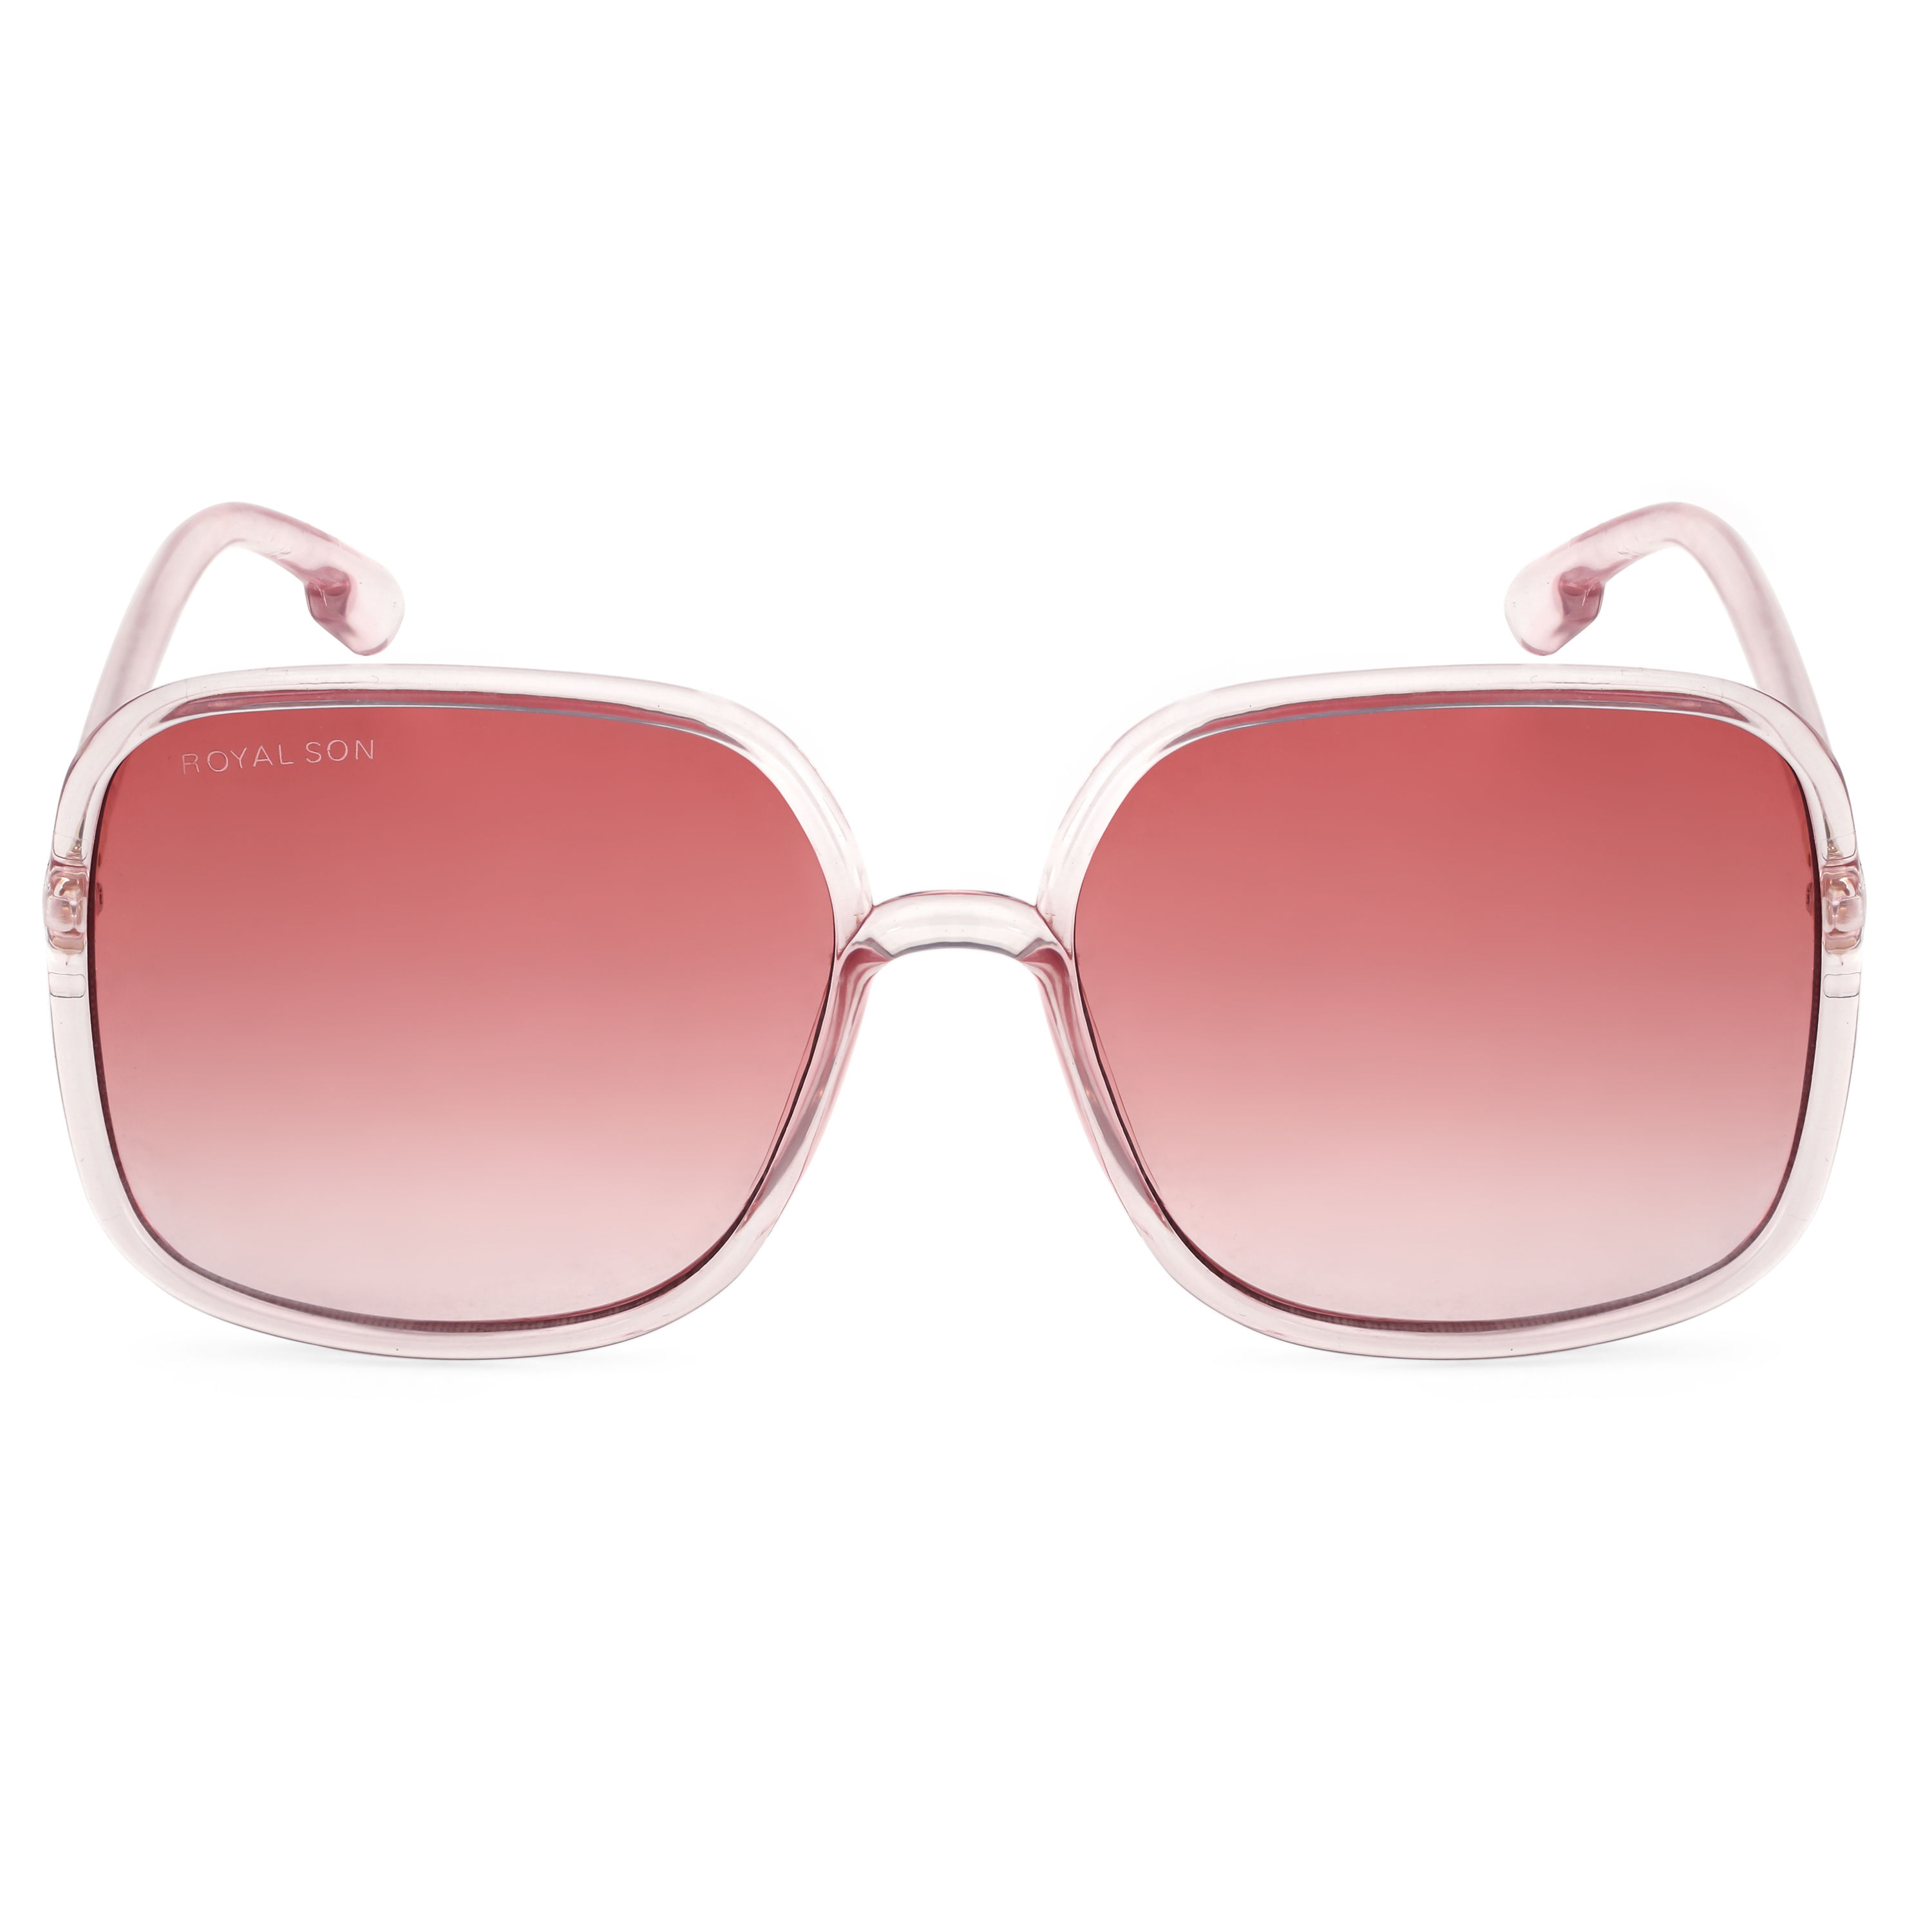 Royal Son Pink Uv Protected Over-Sized Sunglasses